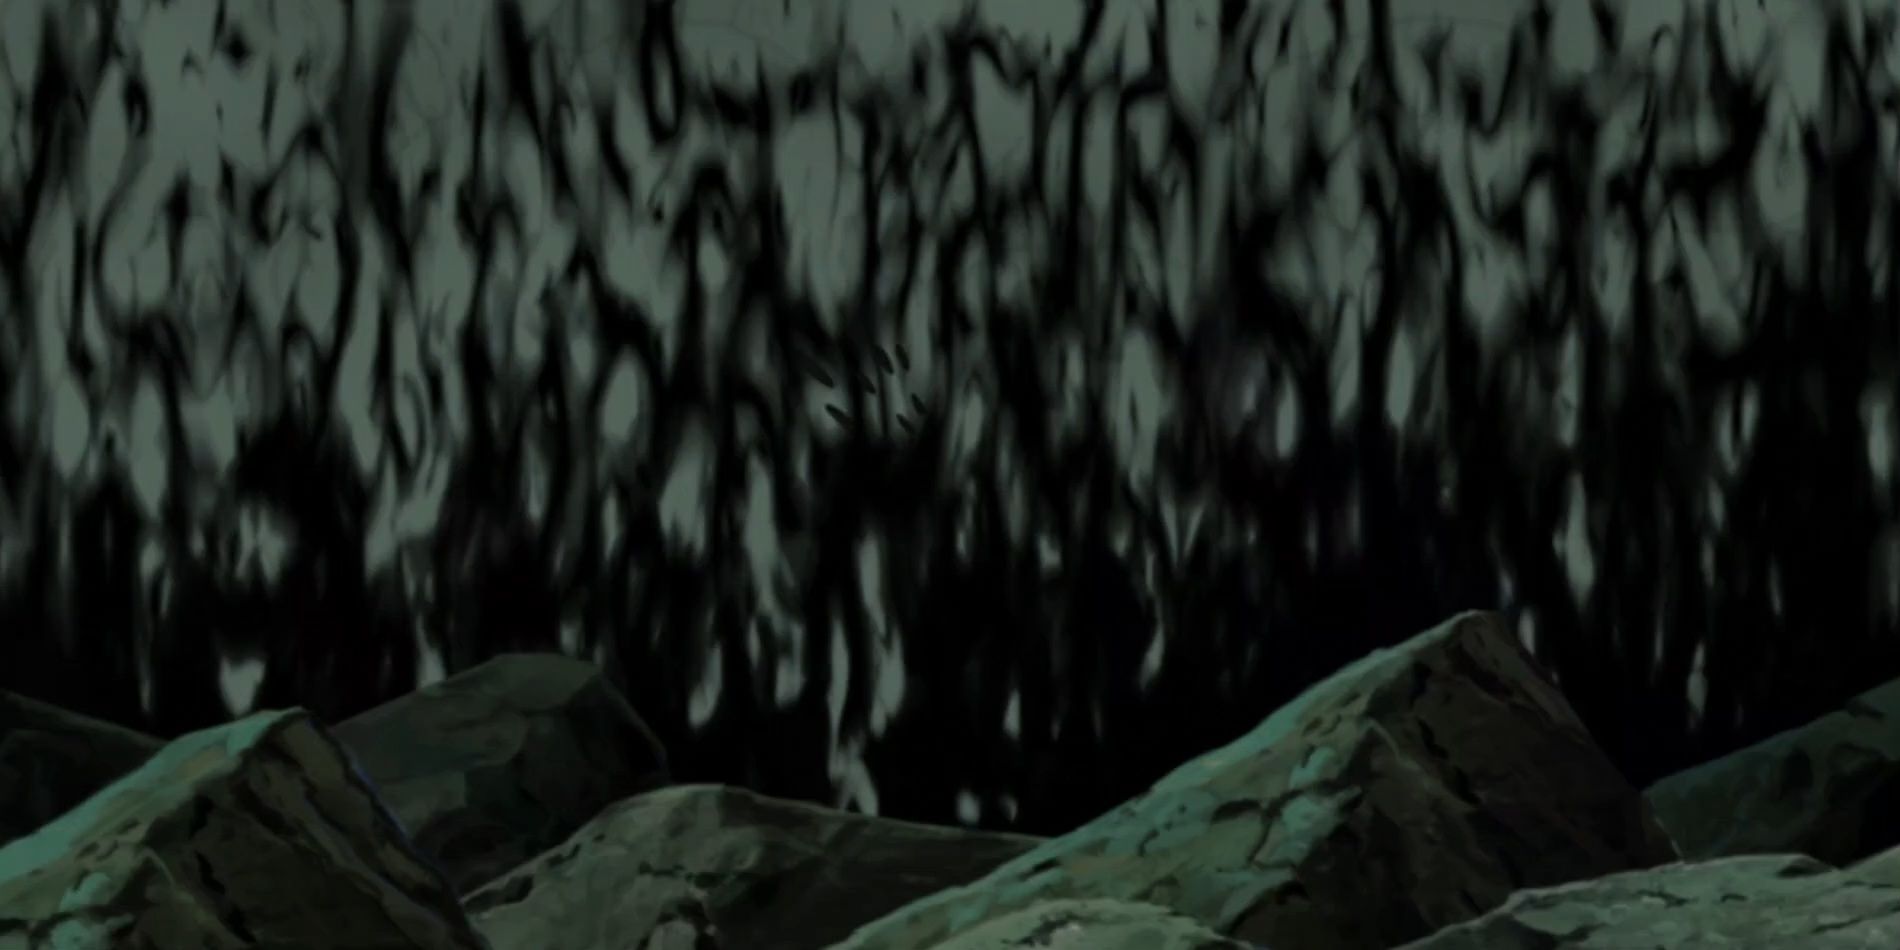 The inextinguishable jet-black flames of the Amaterasu in Naruto.